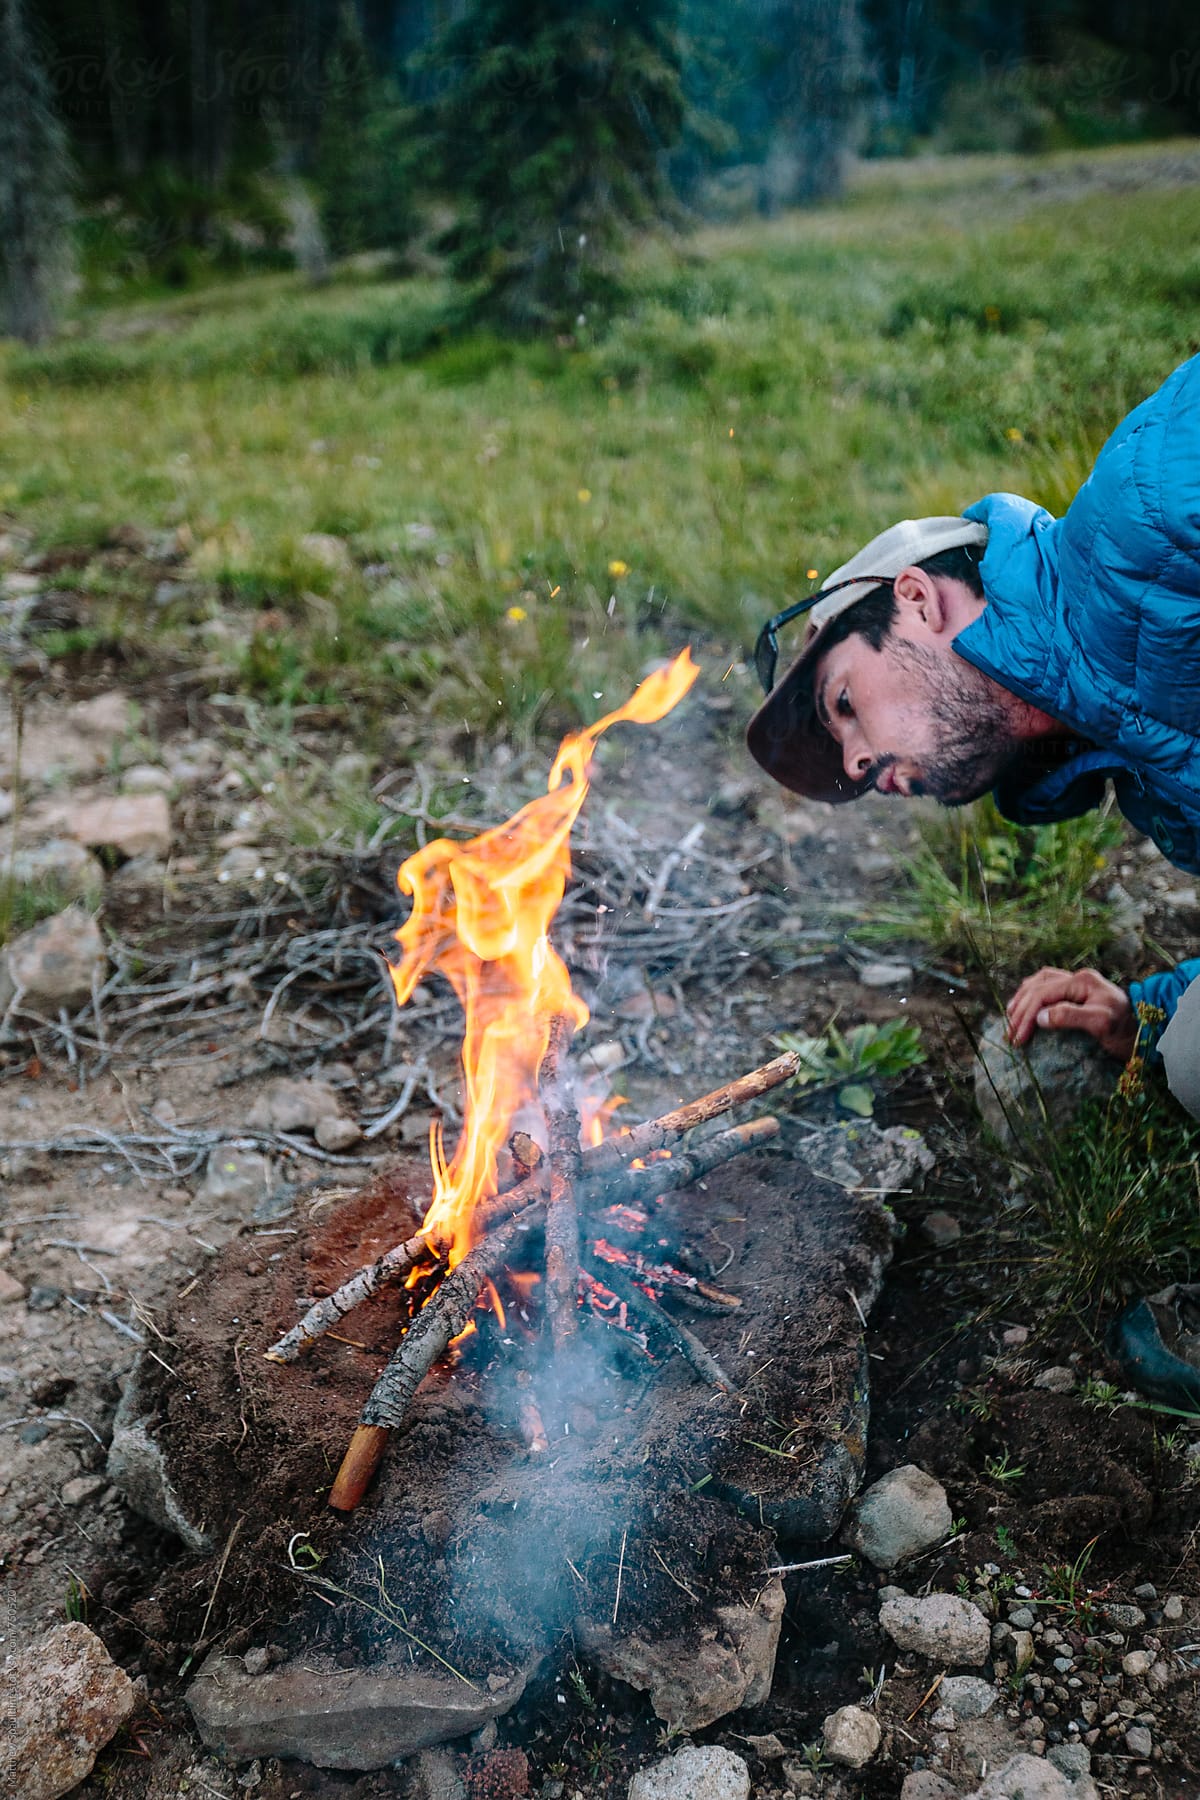 Man Feeding Sticks To Small Fire Outdoors While Camping by Stocksy  Contributor Matthew Spaulding - Stocksy